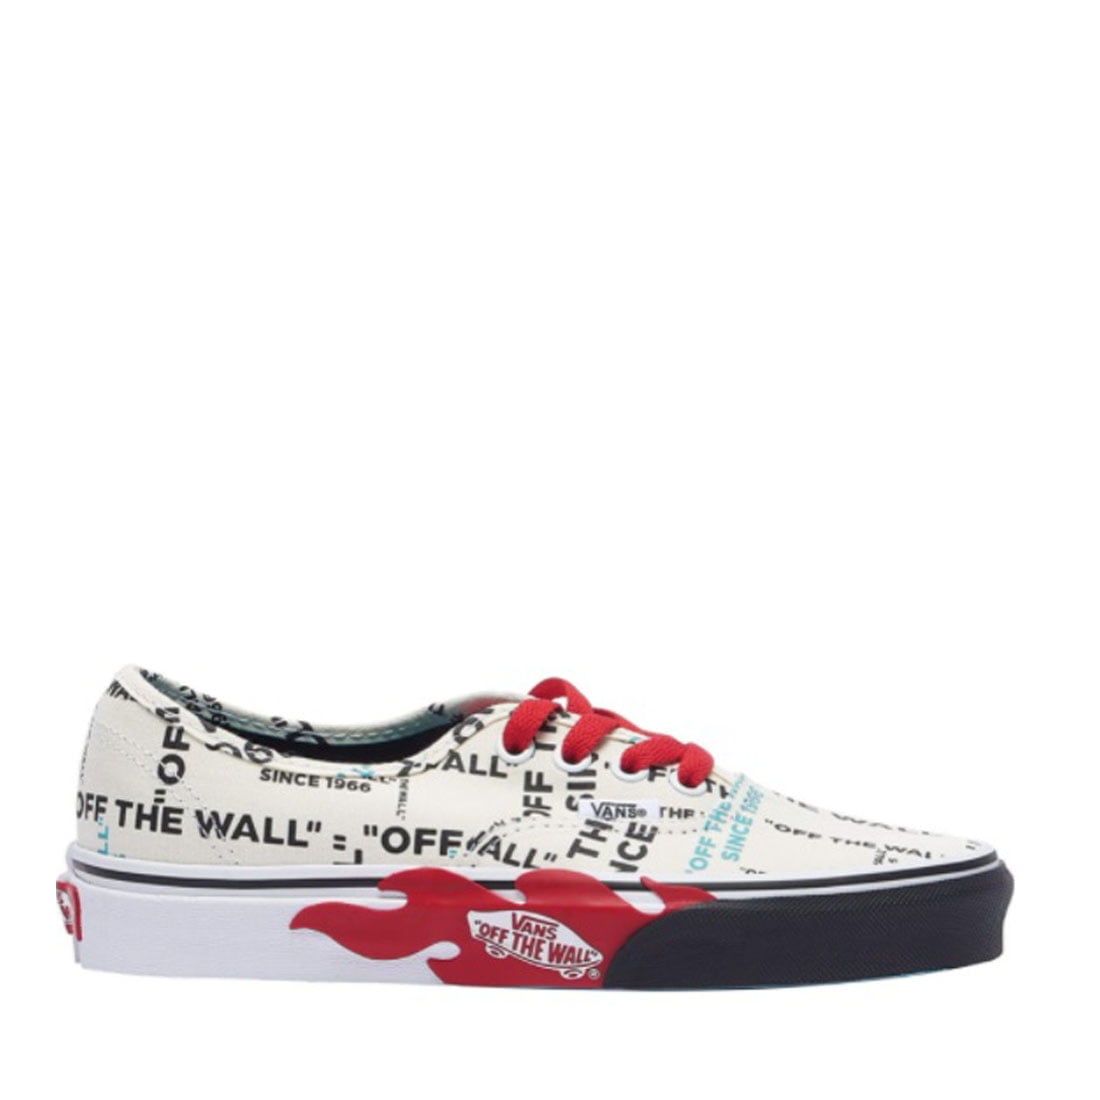 Vans Authentic Off The Wall Youth Kids Size 2.5 Shoes Red White Low Top Sneakers Schoenen Jongensschoenen Sneakers & Sportschoenen 